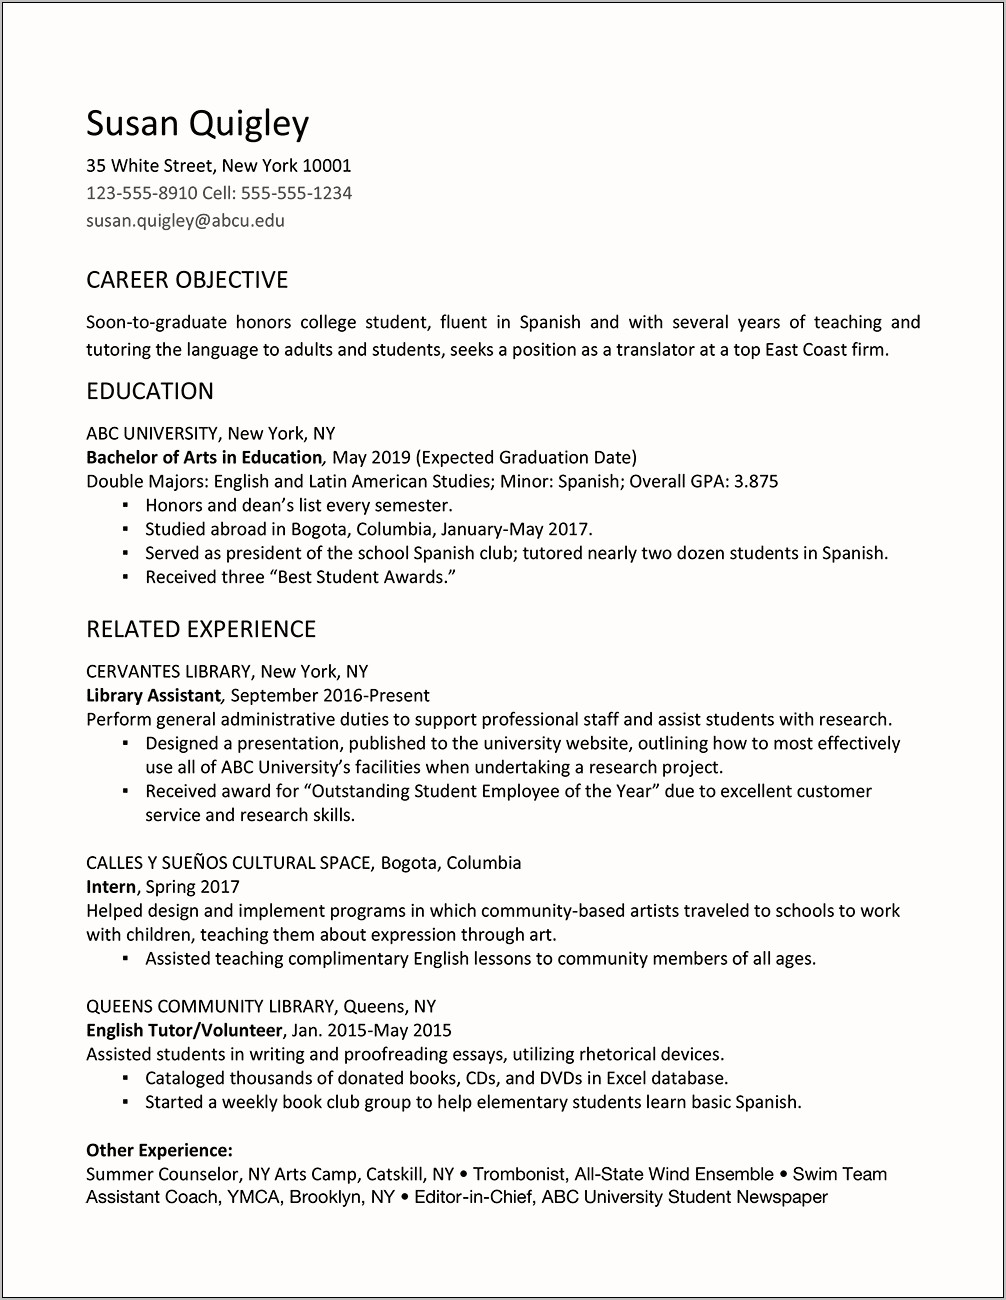 Example Resume Of Pursuing College Degree